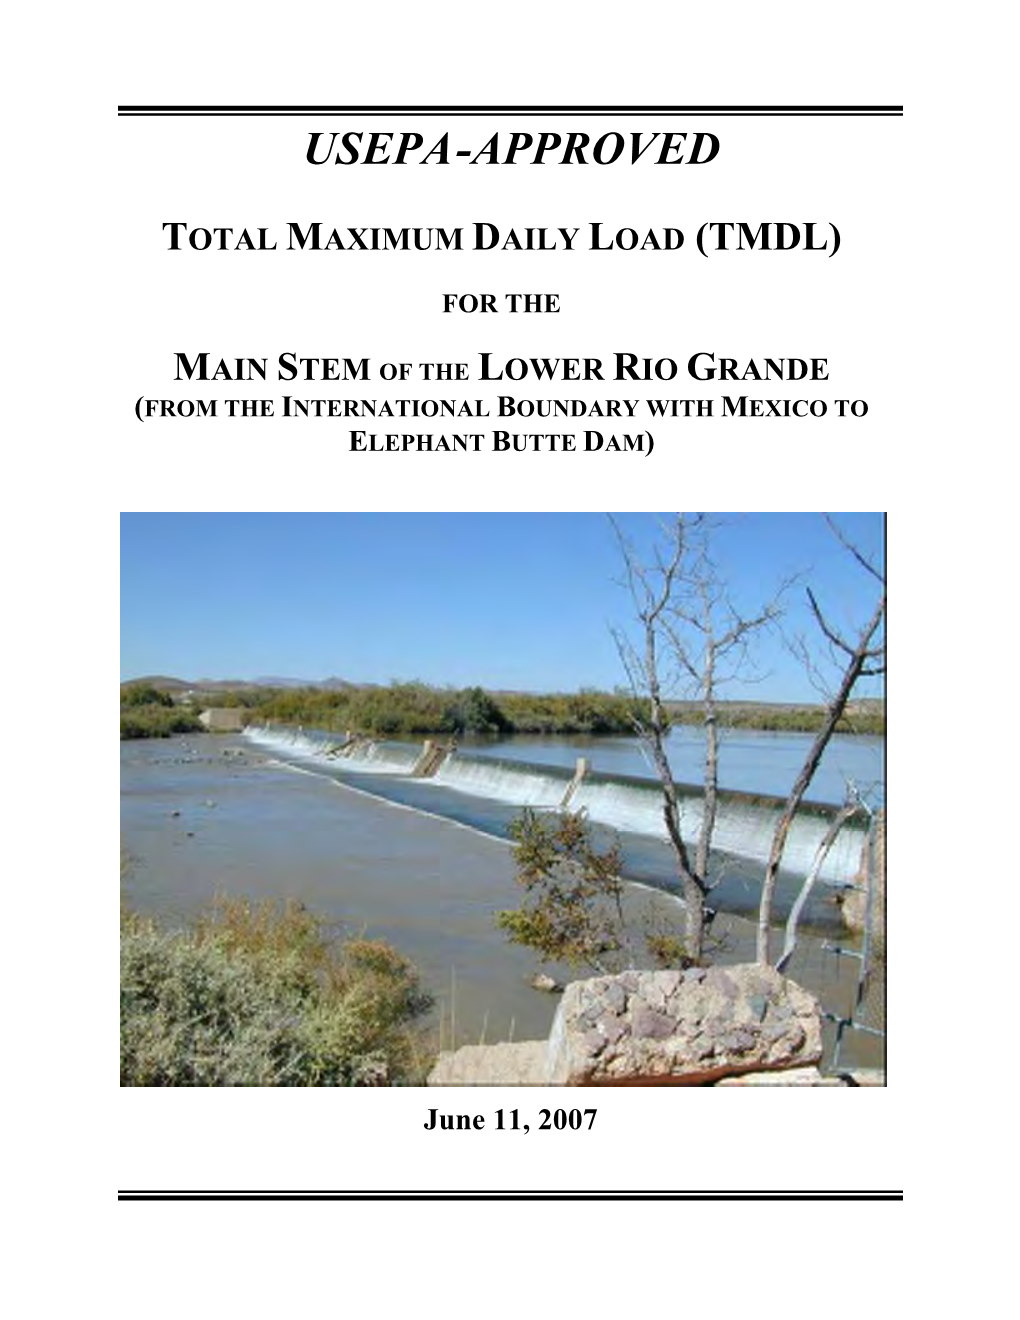 US EPA-APPROVED TMDL for the Lower Rio Grande